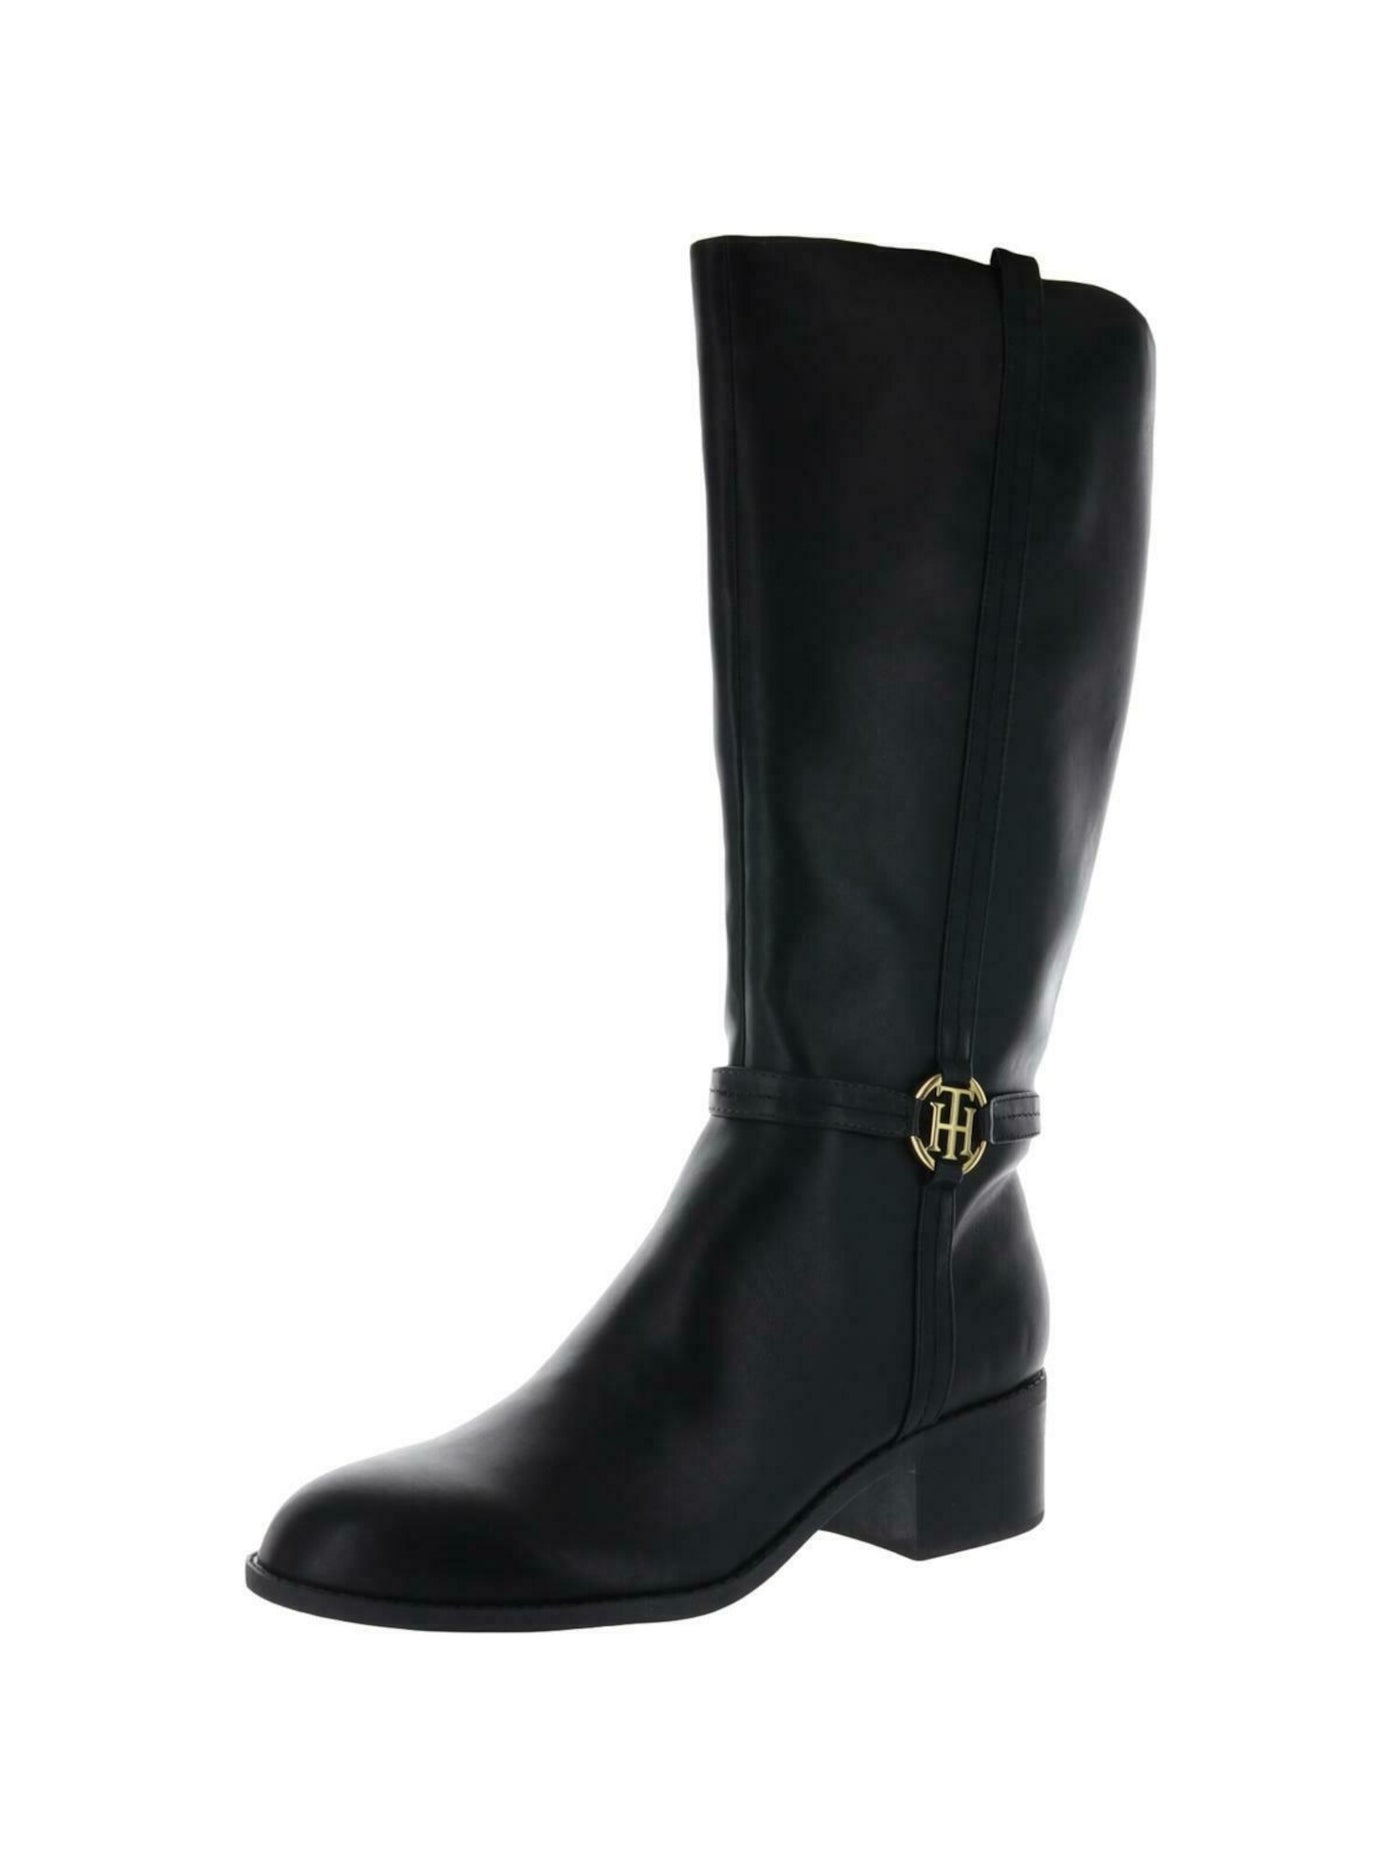 TOMMY HILFIGER Womens Black Signature Hardware Almond Toe Stacked Heel Zip-Up Heeled Boots 6